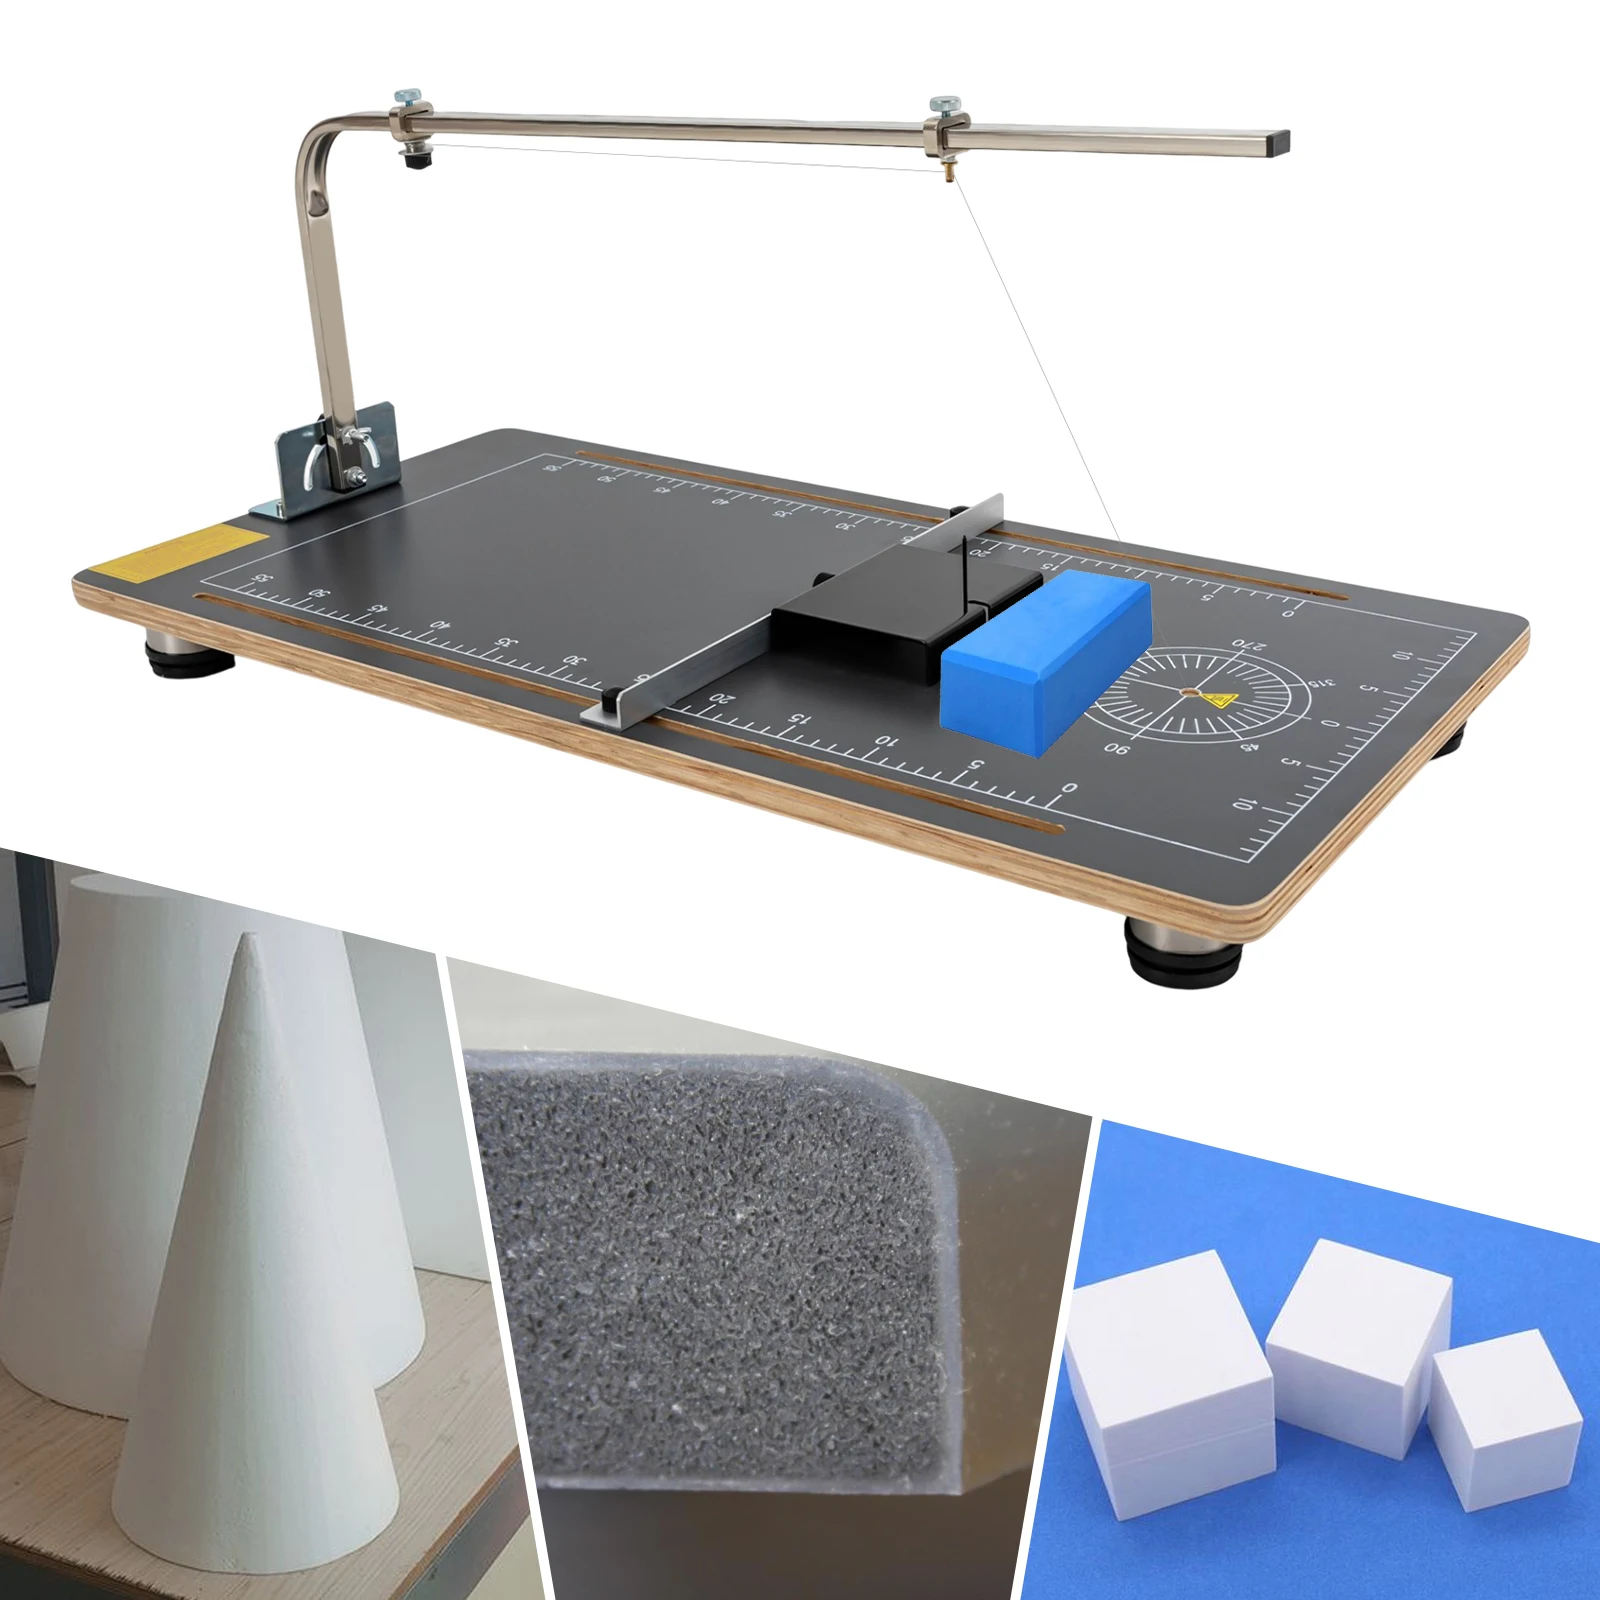 110V/220V 30w Hot Wire Foam Cutter Working Table Tool Desktop Styrofoam Electric Cutting Machine Work Stand Table Tool